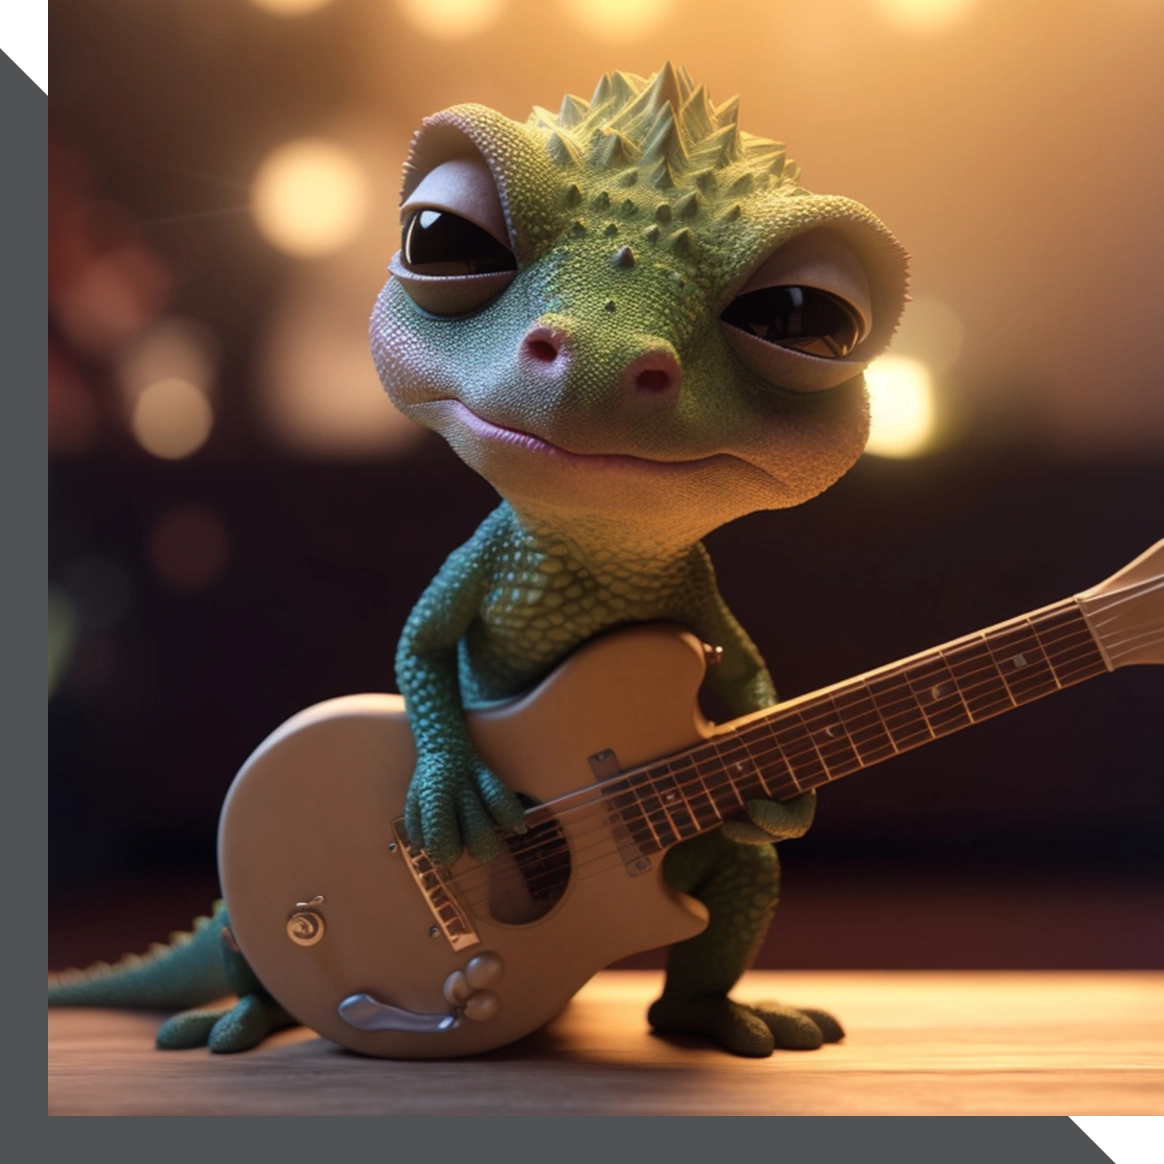 A digital rendering of a small, green chameleon standing upright and holding an electric guitar. The background is softly lit with a warm, golden glow, creating a cozy atmosphere. The chameleon has large eyes and a slightly textured, spiky head.